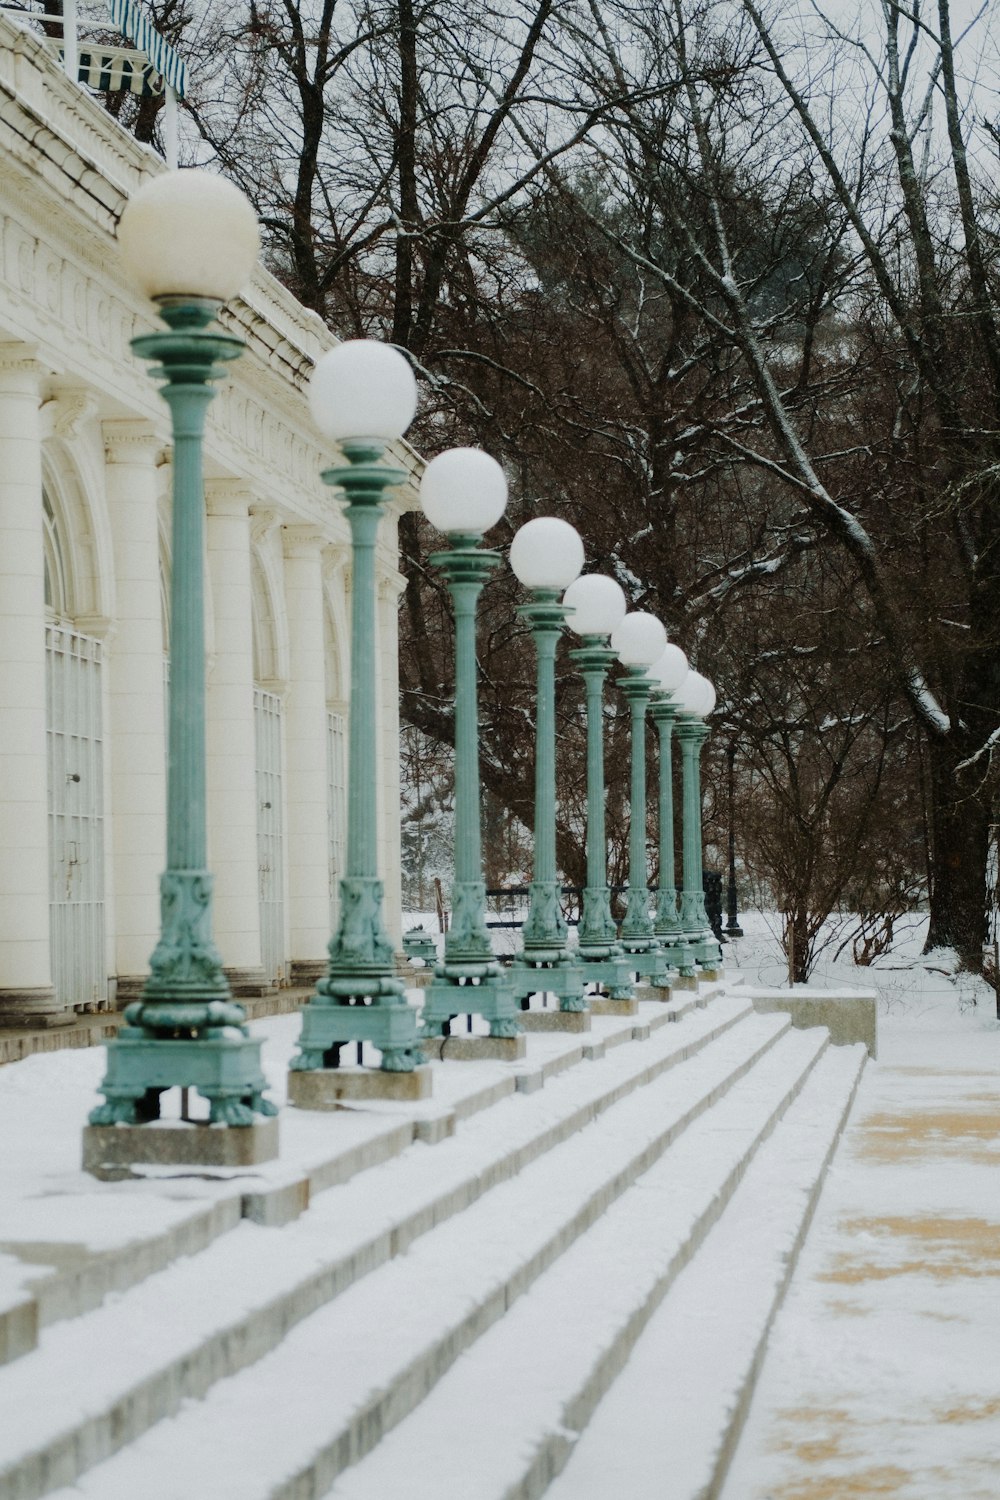 a row of green and white street lights in the snow